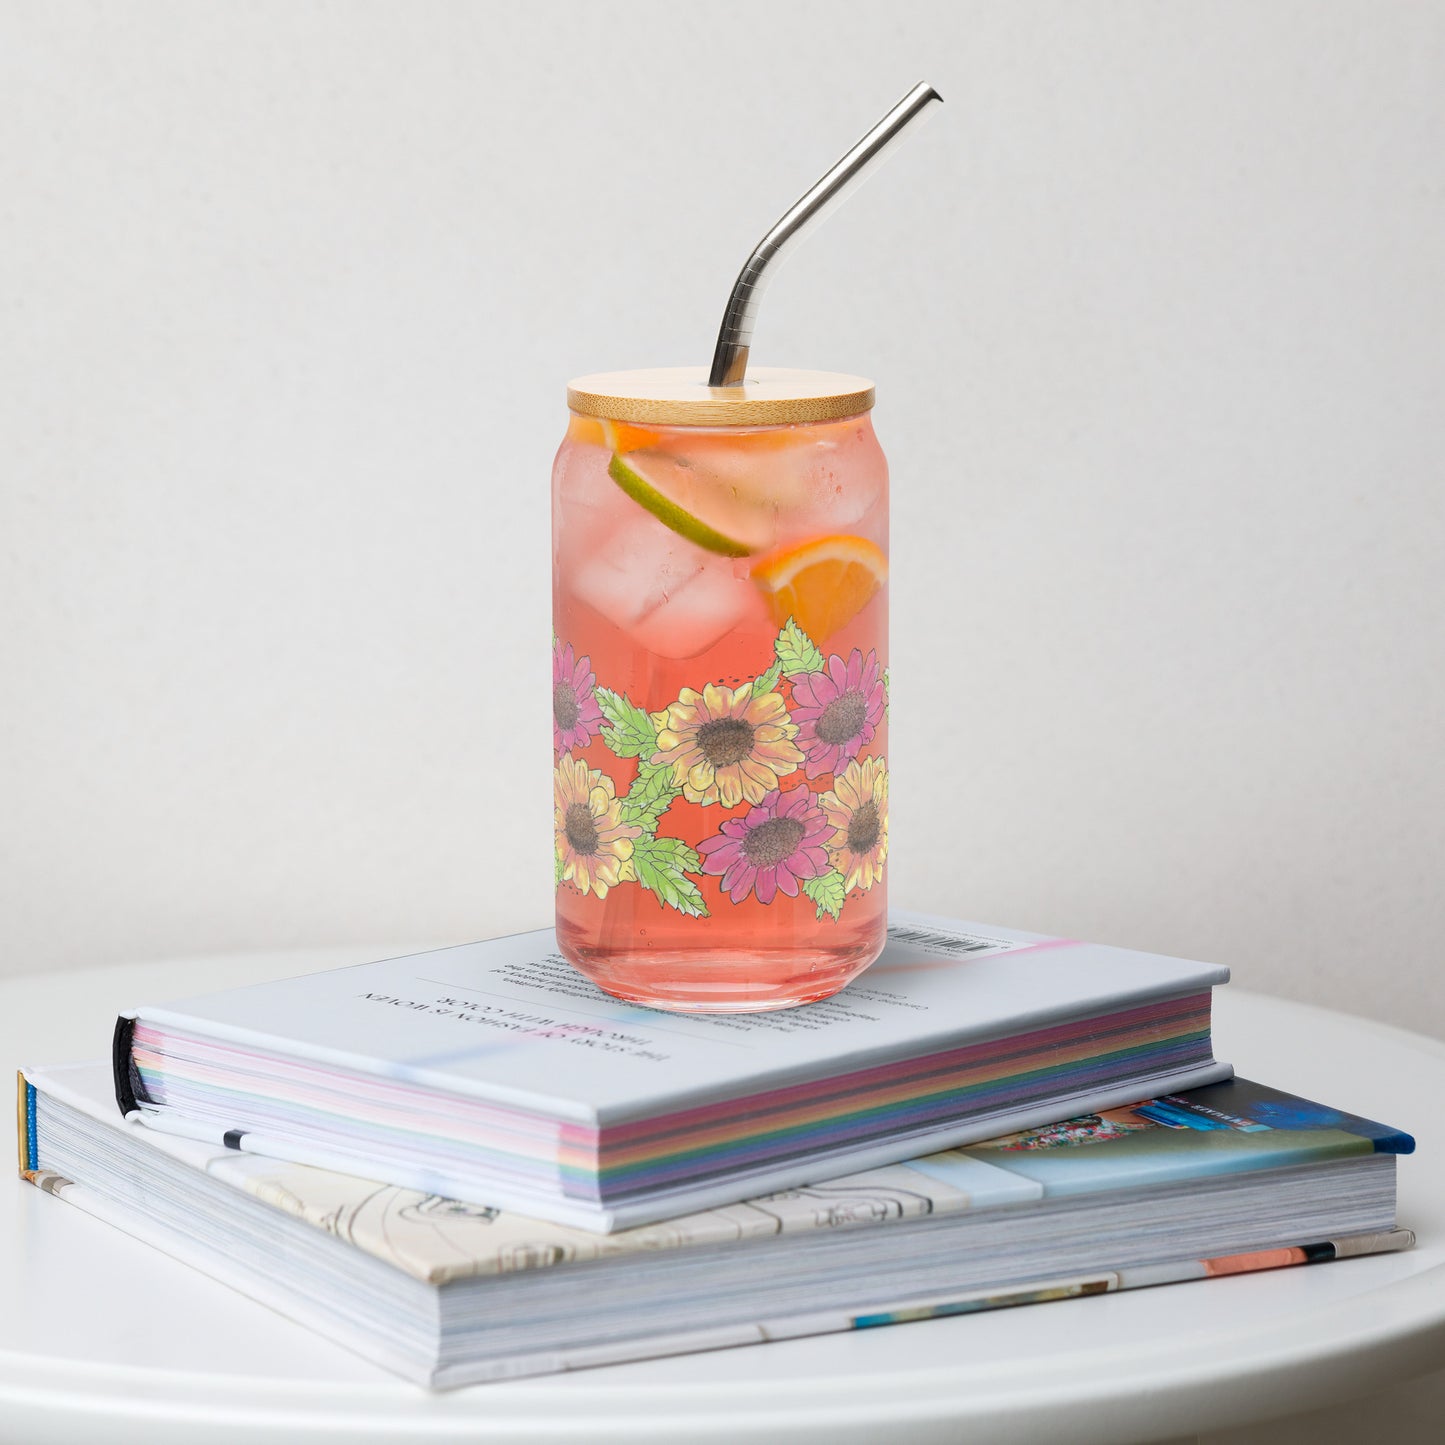 16 ounce can-shaped glass. Features wraparound print of watercolor Gerber daisies. Has a bamboo lid and stainless steel straw.  Shown filled with pink lemonade and sitting on a stack of books.